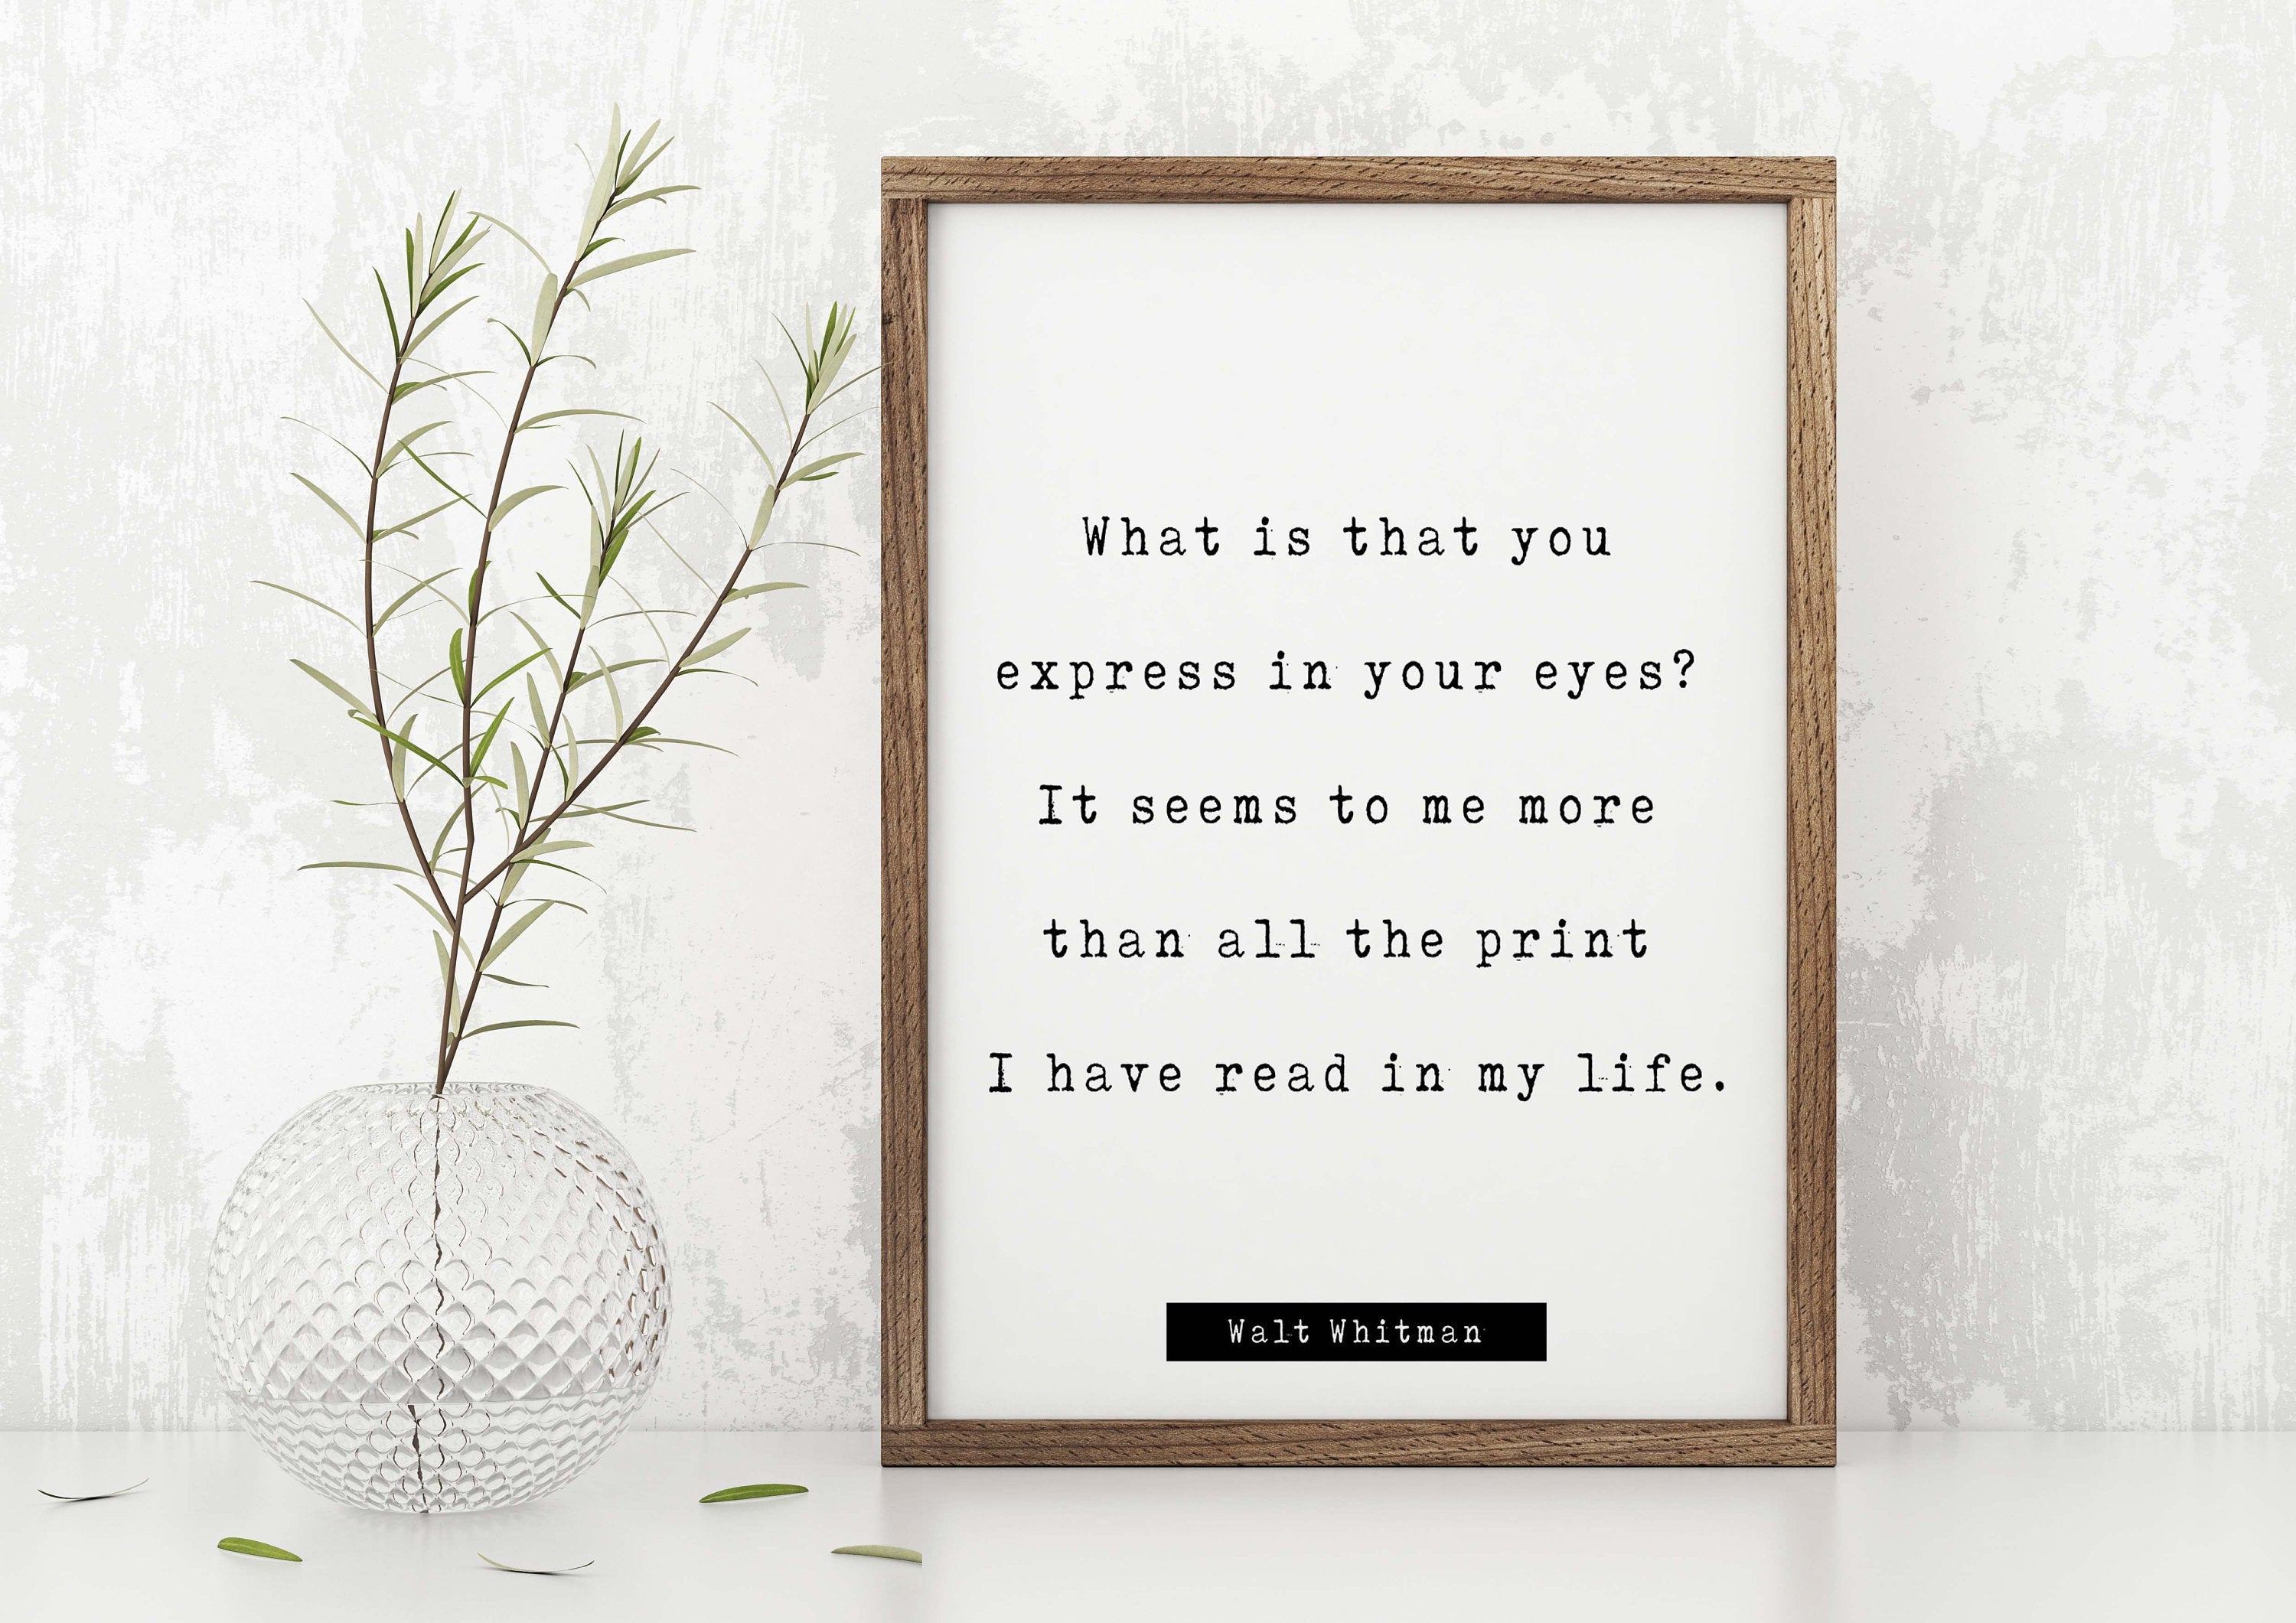 Walt Whitman Quote Print, What is that you express in your eyes? Inspirational love Poem in Black & White for Home Wall Decor Unframed - BookQuoteDecor